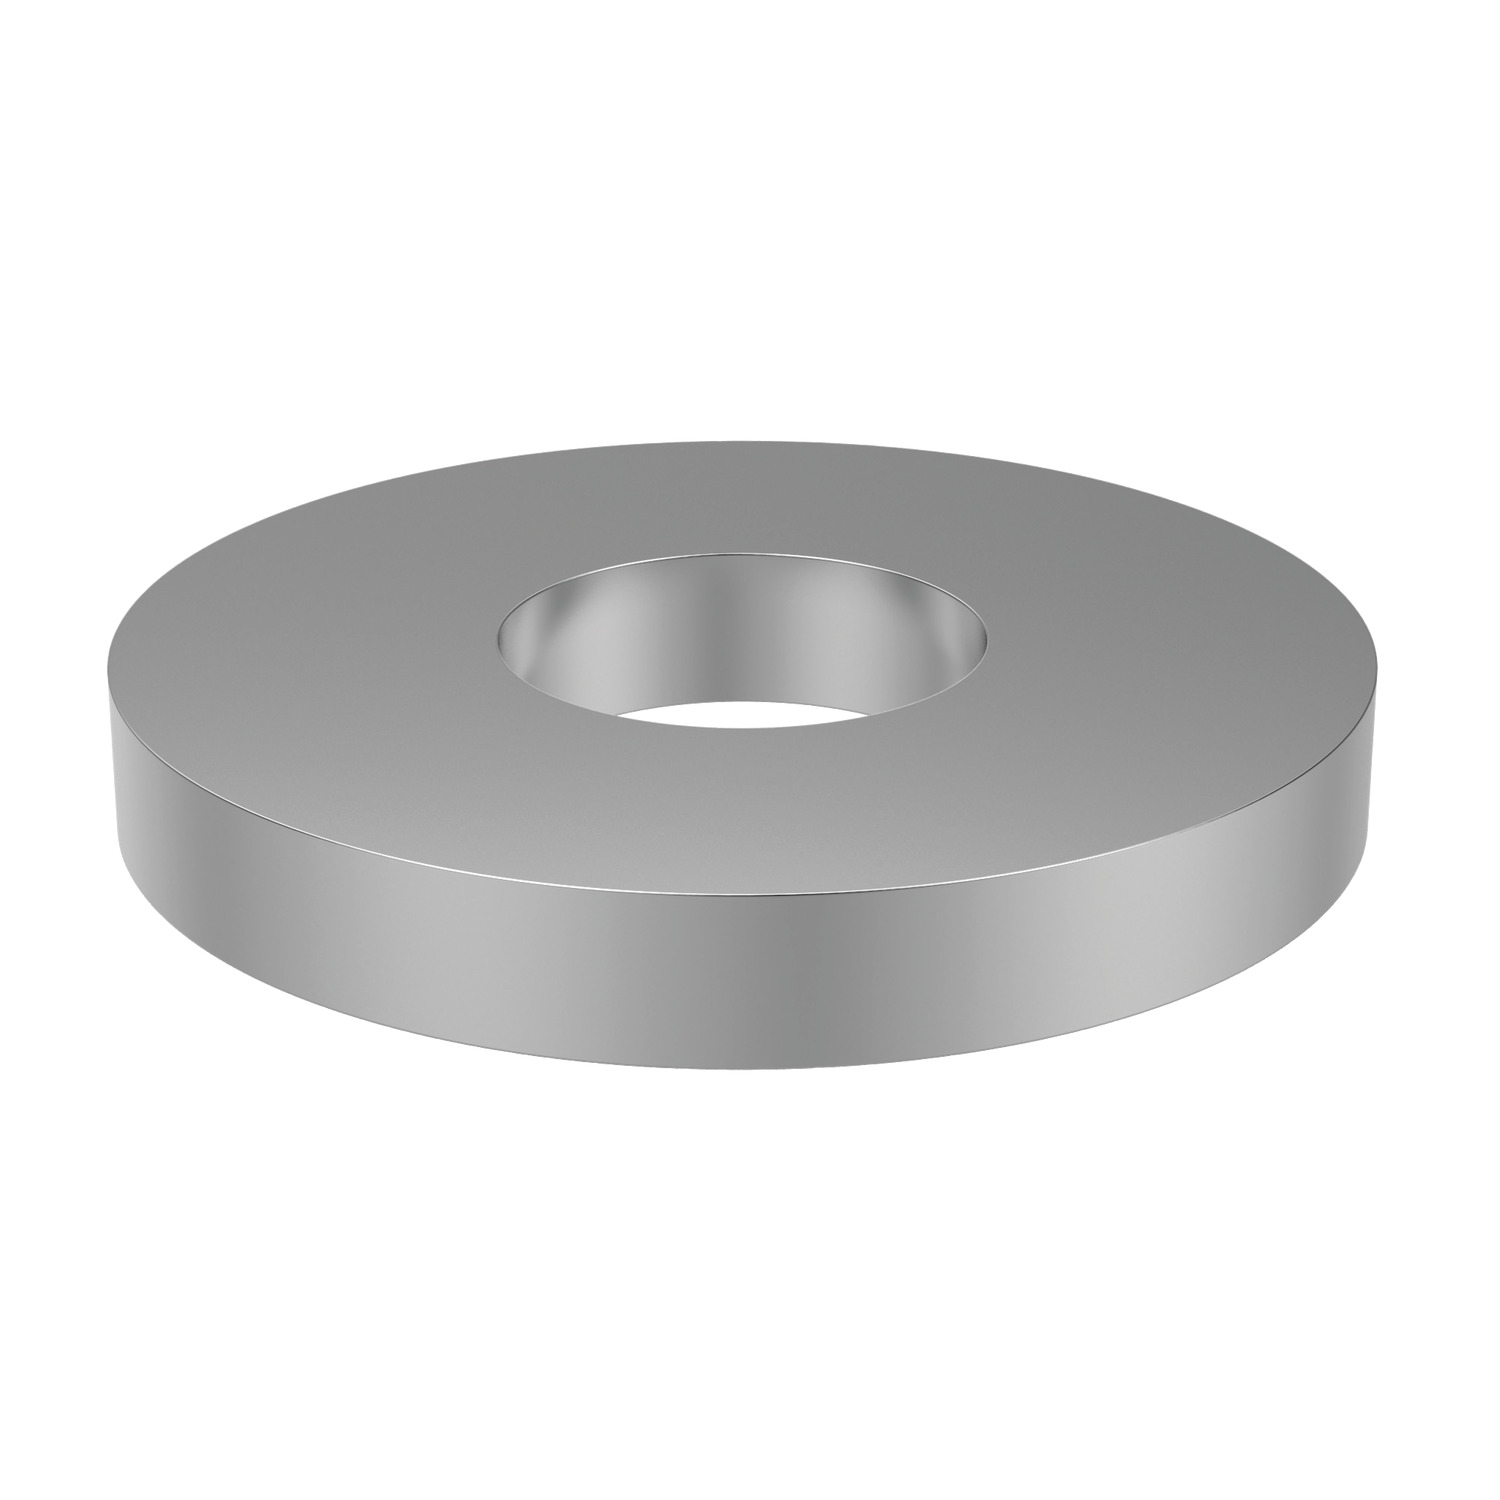 Product 62160, Spacers for part nos. 62000 to 62140 / 